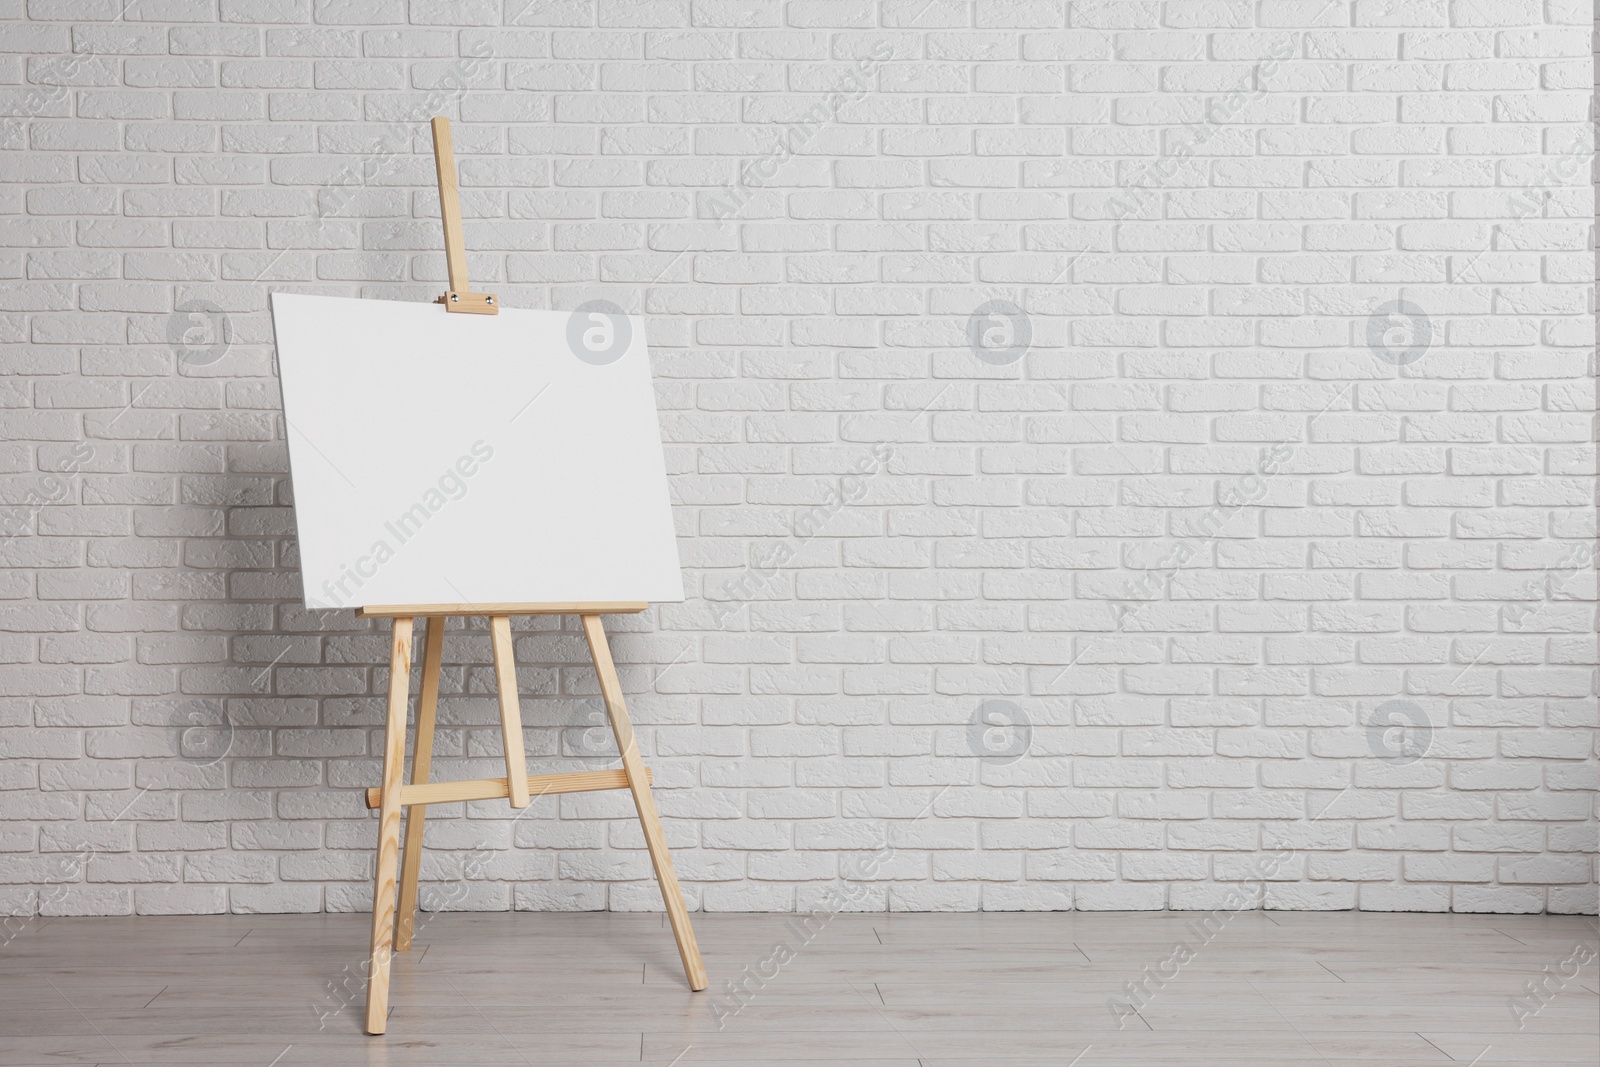 Photo of Wooden easel with blank canvas near white brick wall indoors. Space for text